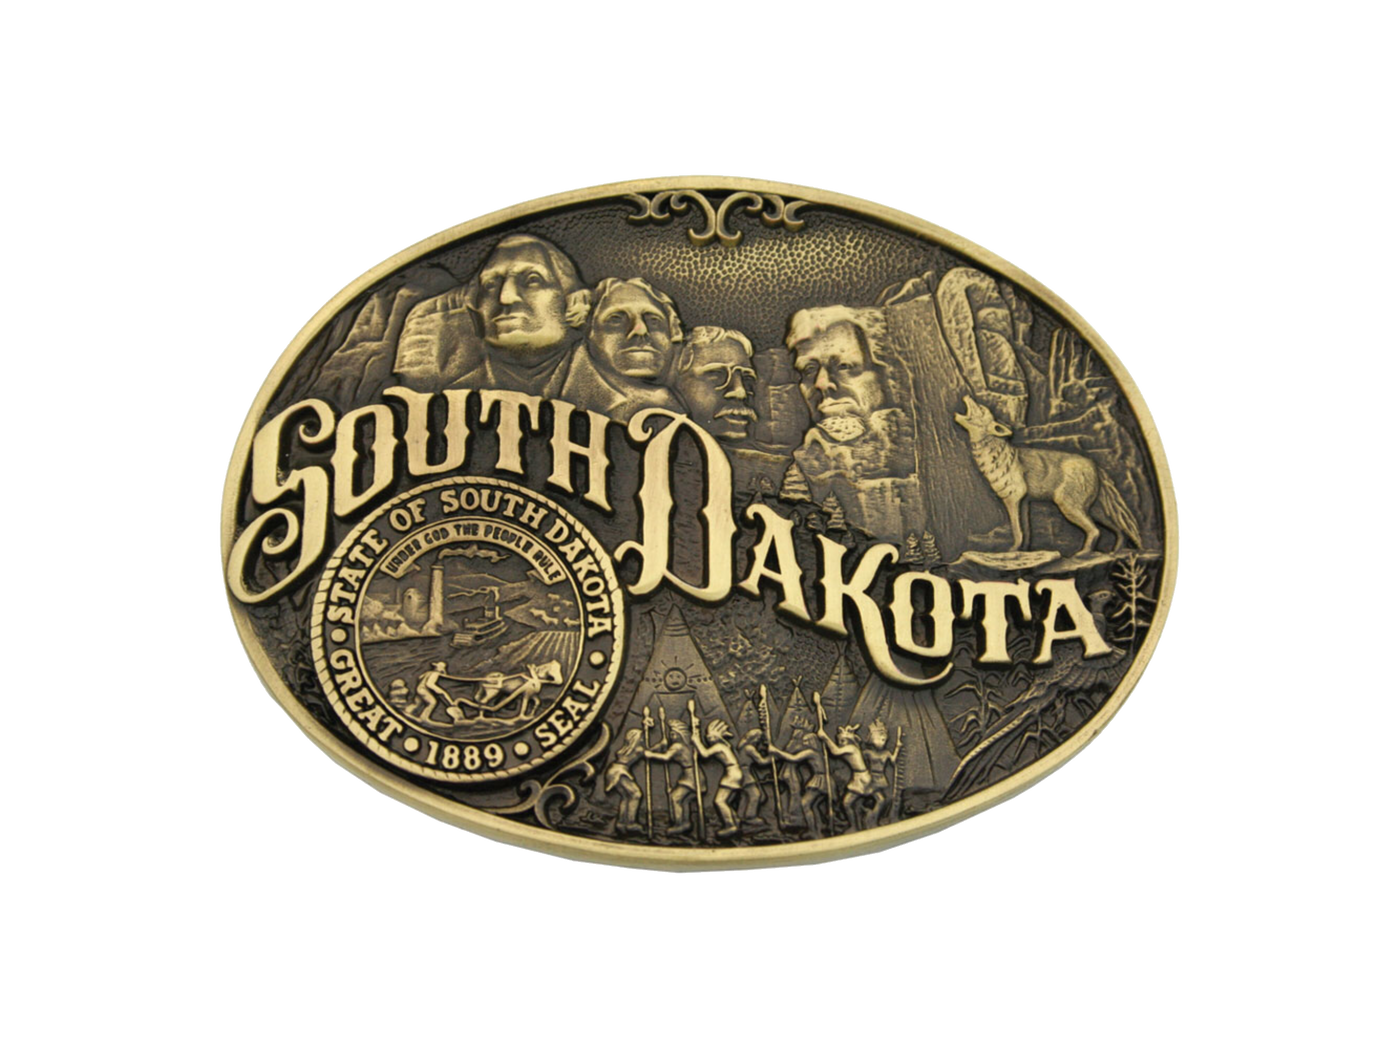 Small, oval cast brass Attitude belt buckle with polished wire trim. Large lettering spelling out South Dakota stretches boldly across, surrounded by a set of antiqued figures in celebration of South Dakota heritage including Mount Rushmore, Native American dancers and the state seal. Buckles are acid washed to add the dark antiqued patina and hand buffed to bring out the highlights and details.  Standard 1.5" belt swivel. Available online and in our shop in Smyrna, TN, just outside of Nashville.